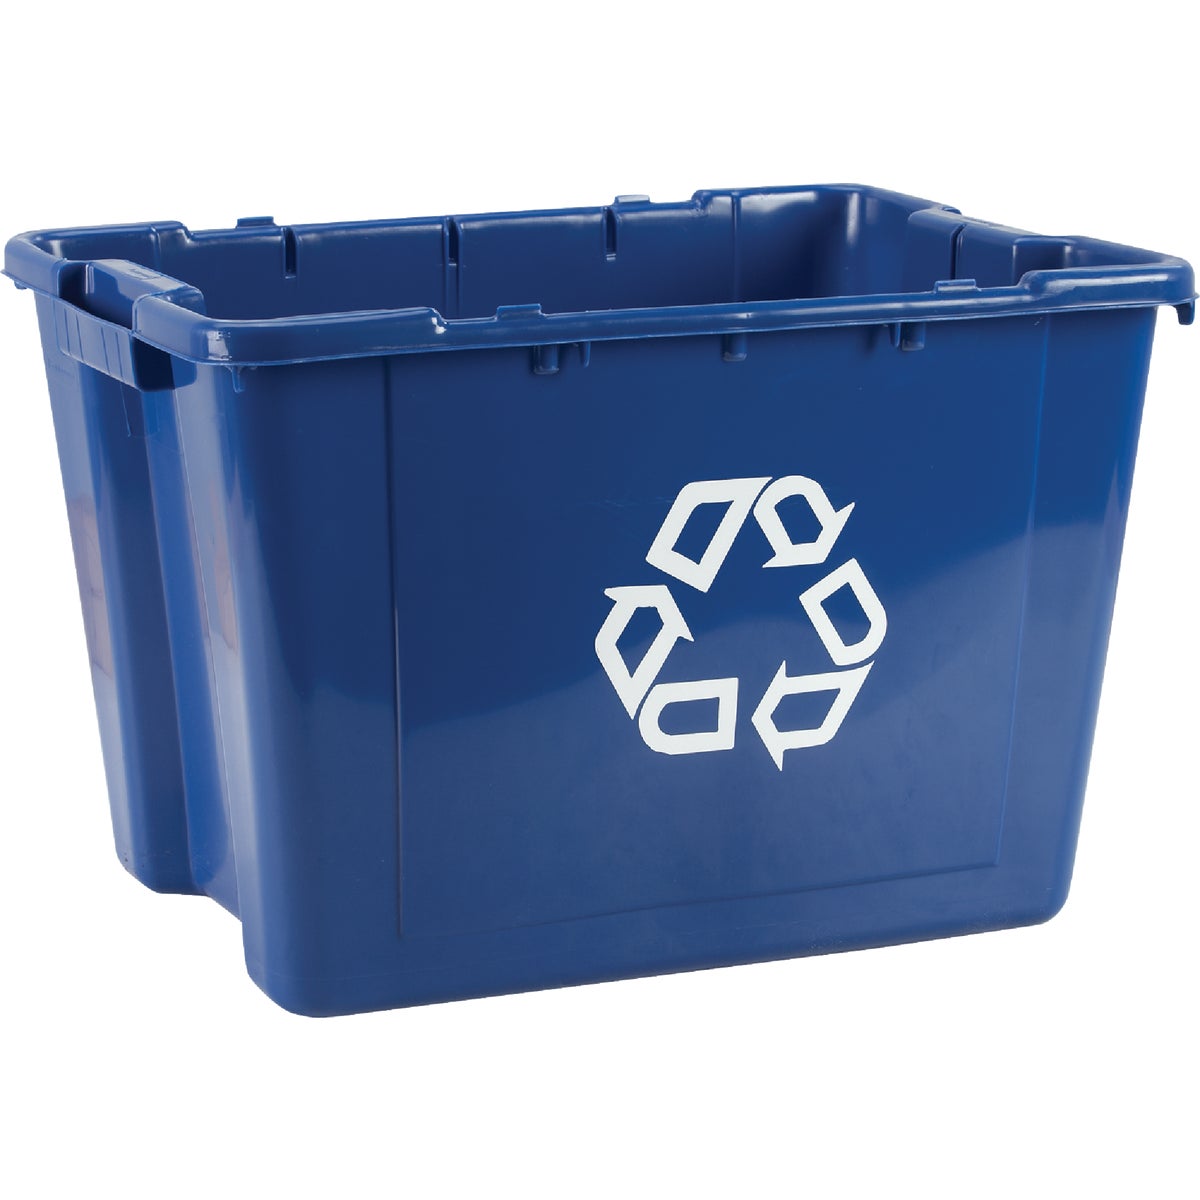 Item 609382, The Rubbermaid Commercial Recycling Bin is made of post-consumer recycled 